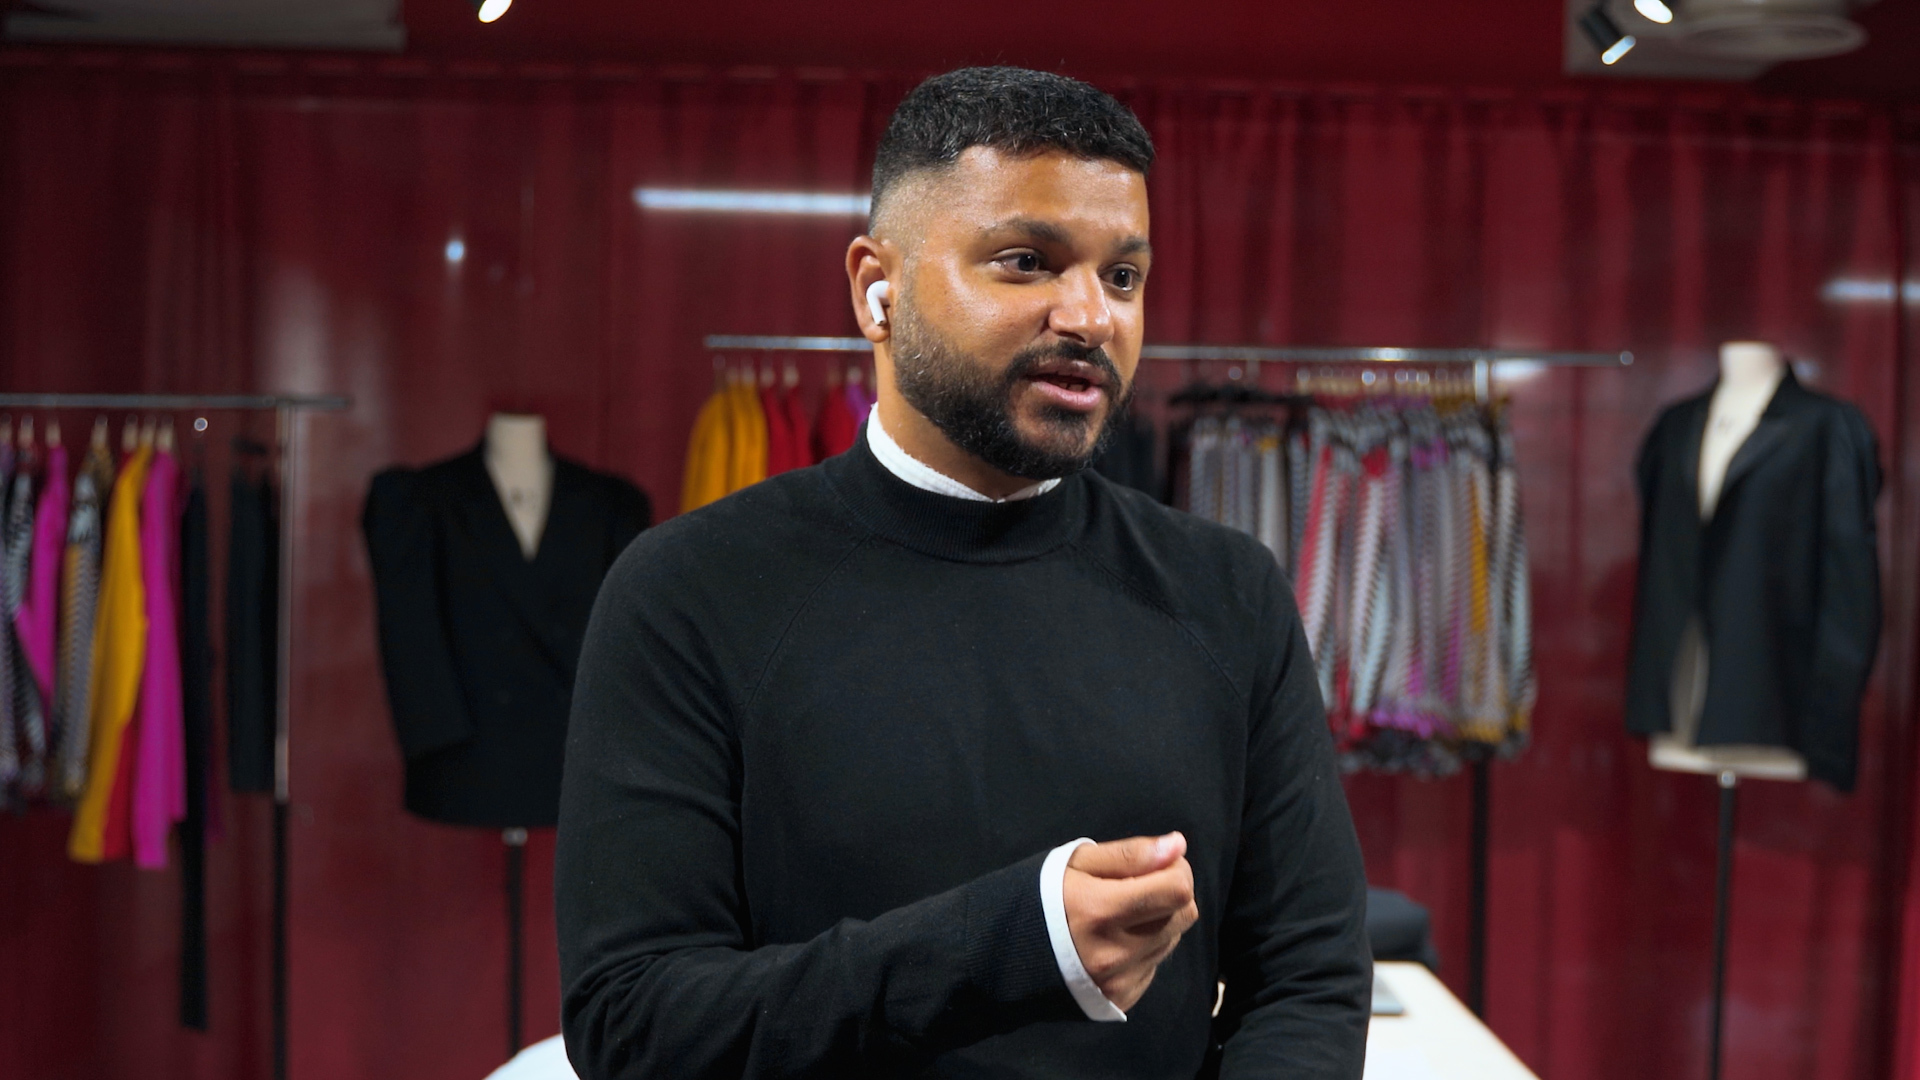 Mother’s inspiration: in conversation with fashion designer Fahad Al Obaidly